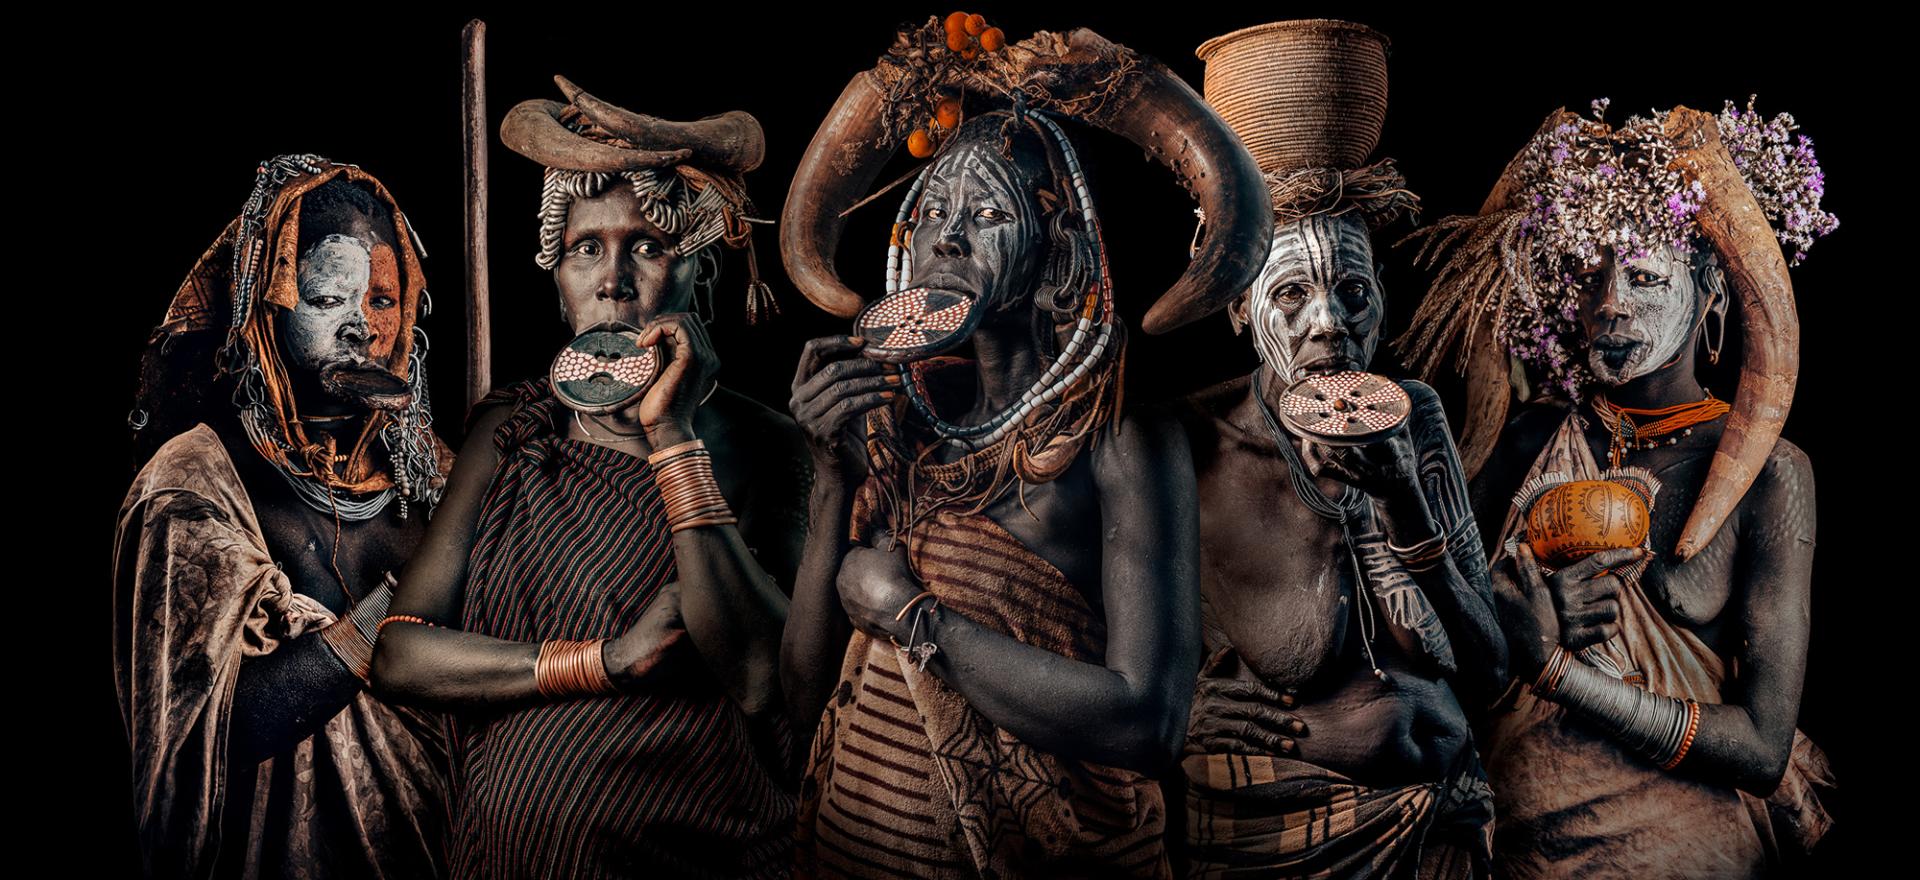 New York Photography Awards Winner - People of the Omo Valley